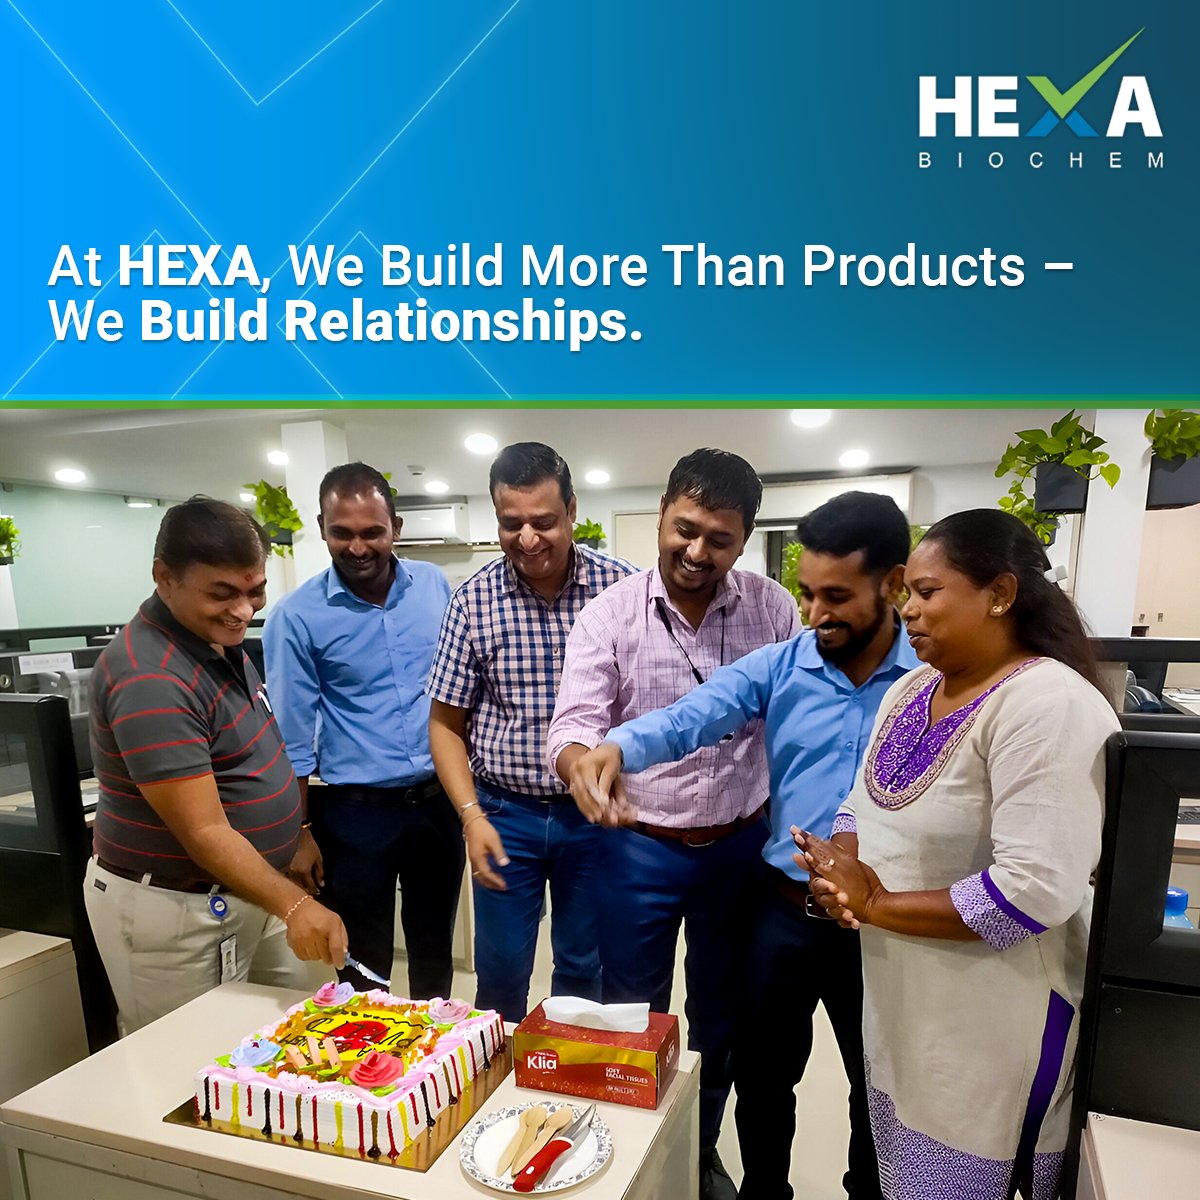 Join a Team Where Bonding Fuels Success.

At HEXA, we go beyond products to build enduring relationships. Join a team where bonding is the secret sauce to our success!

#HEXACulture #TeamSpirit #JoinUsNow #WorkplaceBonding
#HEXAVibes #TeamSpirit #GreatPlaceToWork